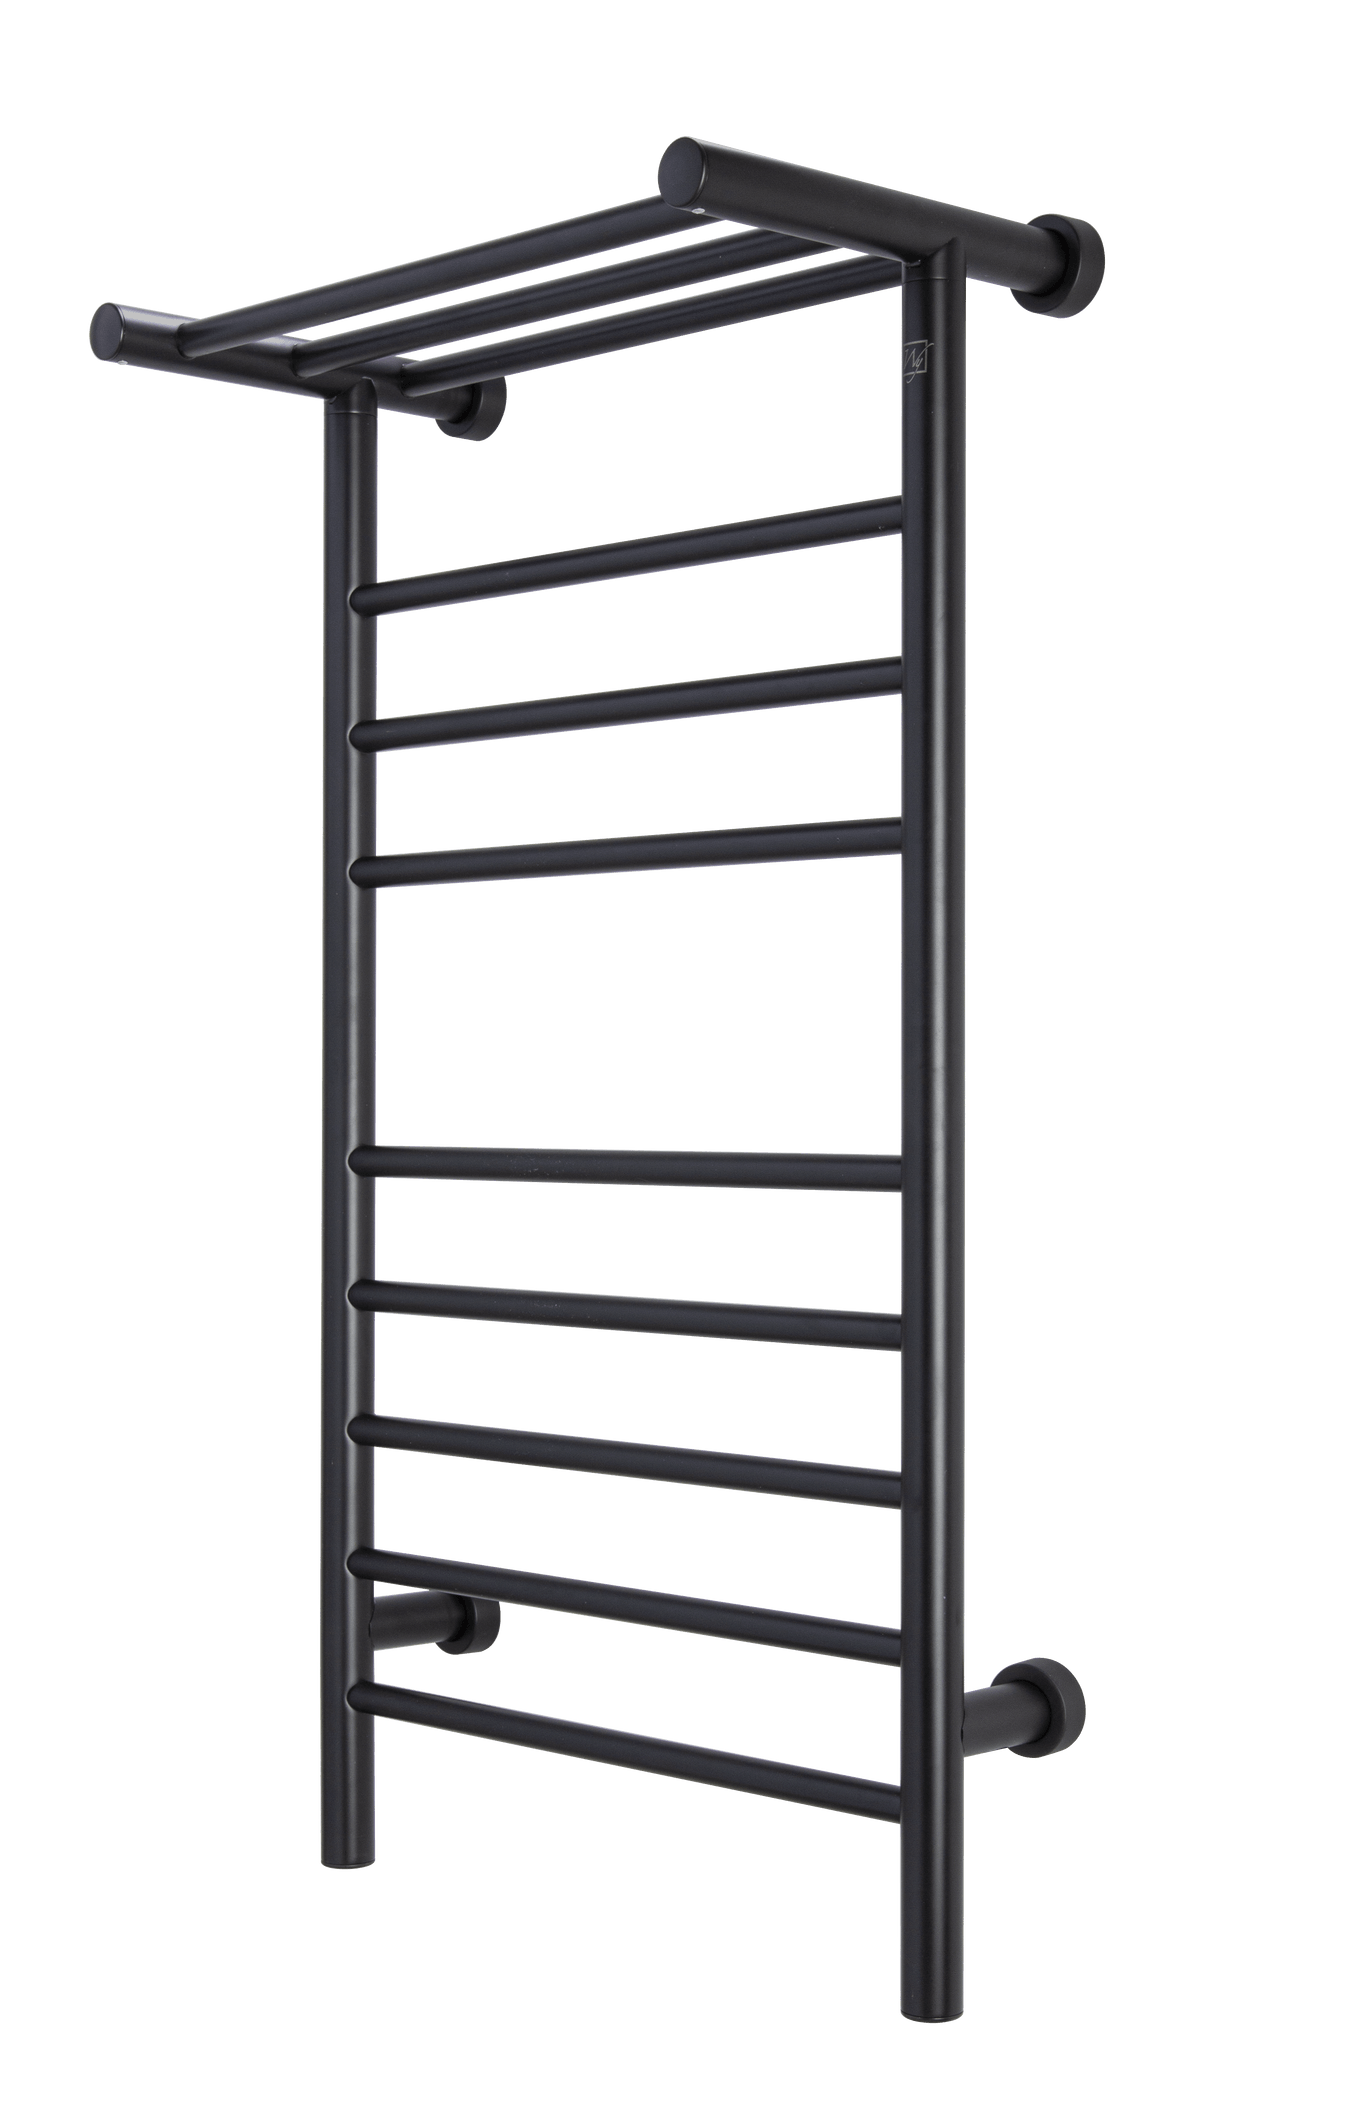 WarmlyYours Summit Dual Connect (Hardwired and Plug in) Towel Warmer - 19"w x 35.5"h